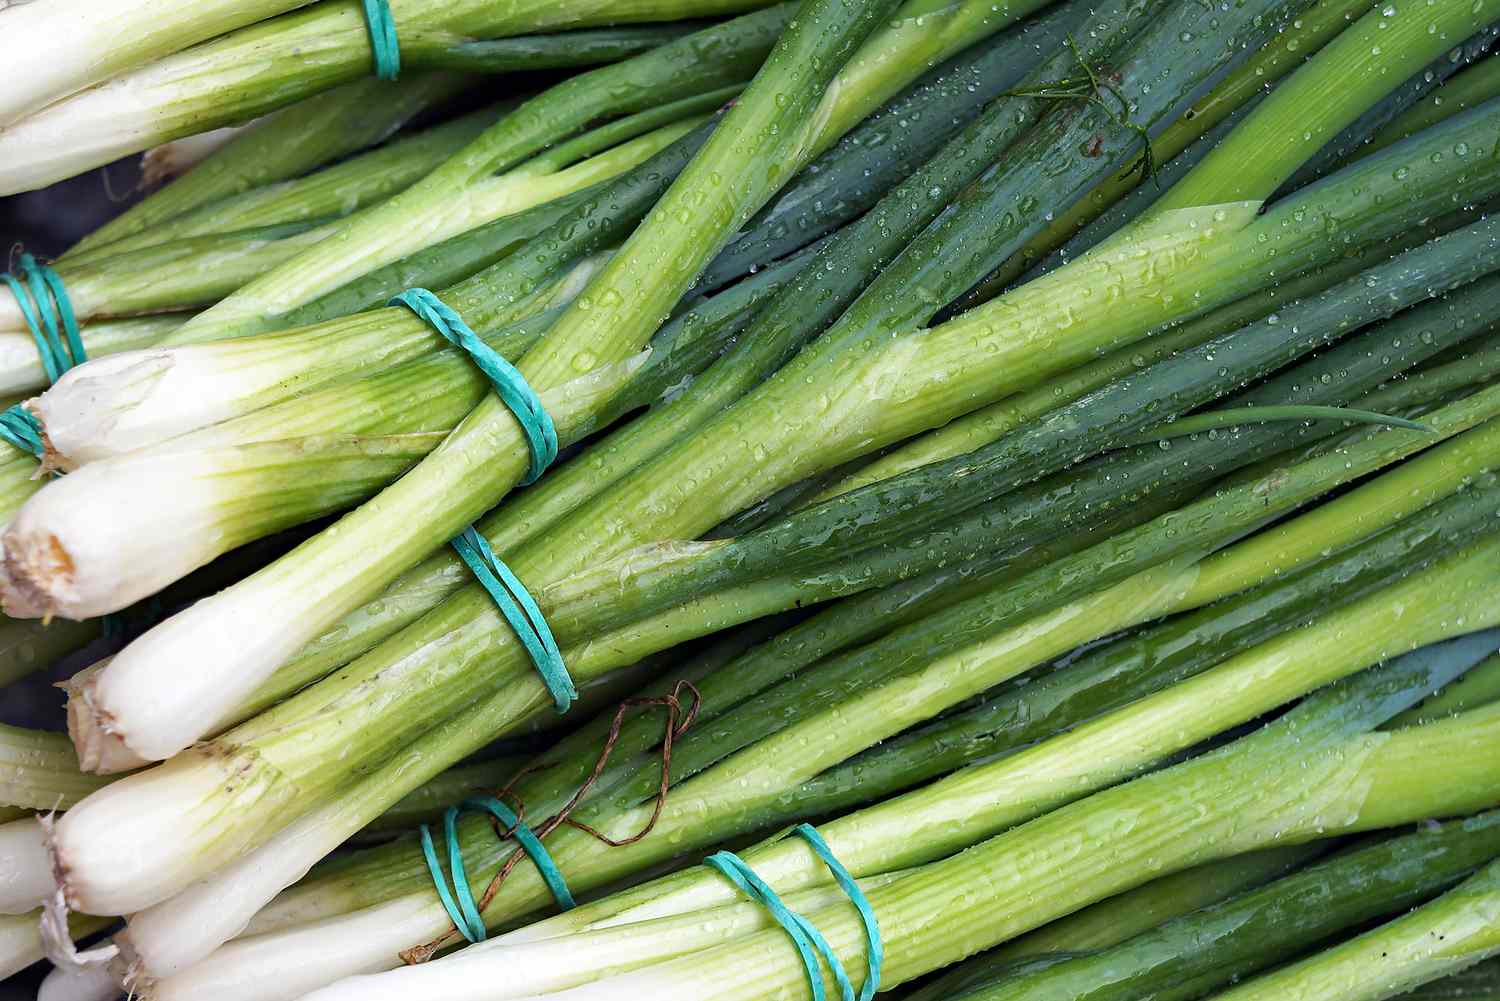 10-nutrition-facts-for-green-onions